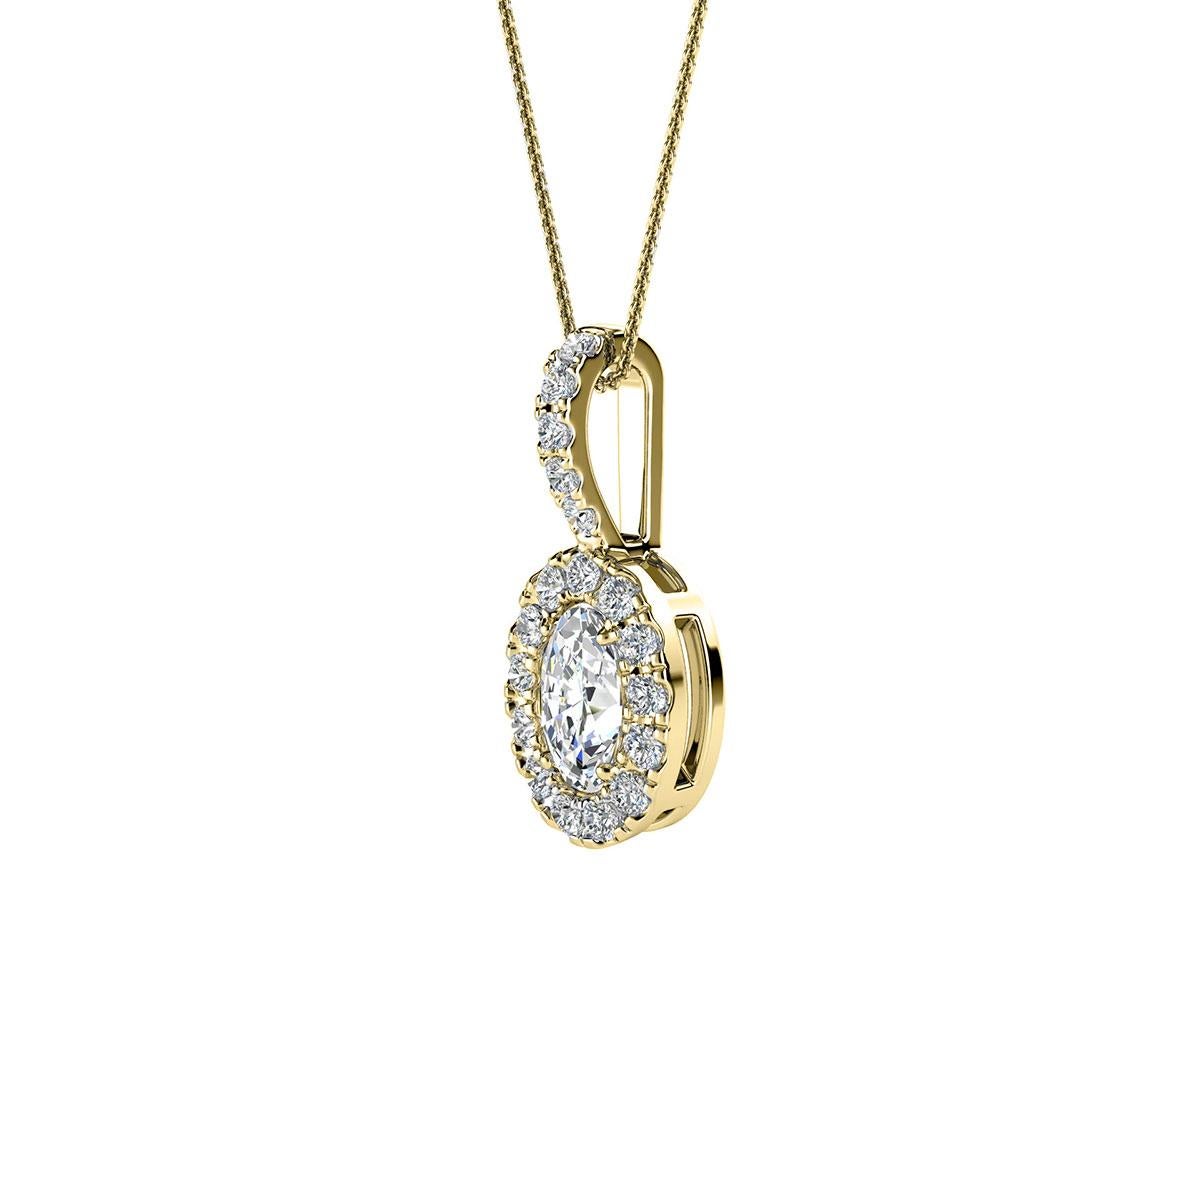 This delicate pendant features one oval-shaped diamond that is approximately 0.23-carat total weight ( 5mm x 3mm) encircled by a halo of perfectly matched 13 brilliant round diamonds in about 0.12-carat total weight. The pendant is measuring at 14